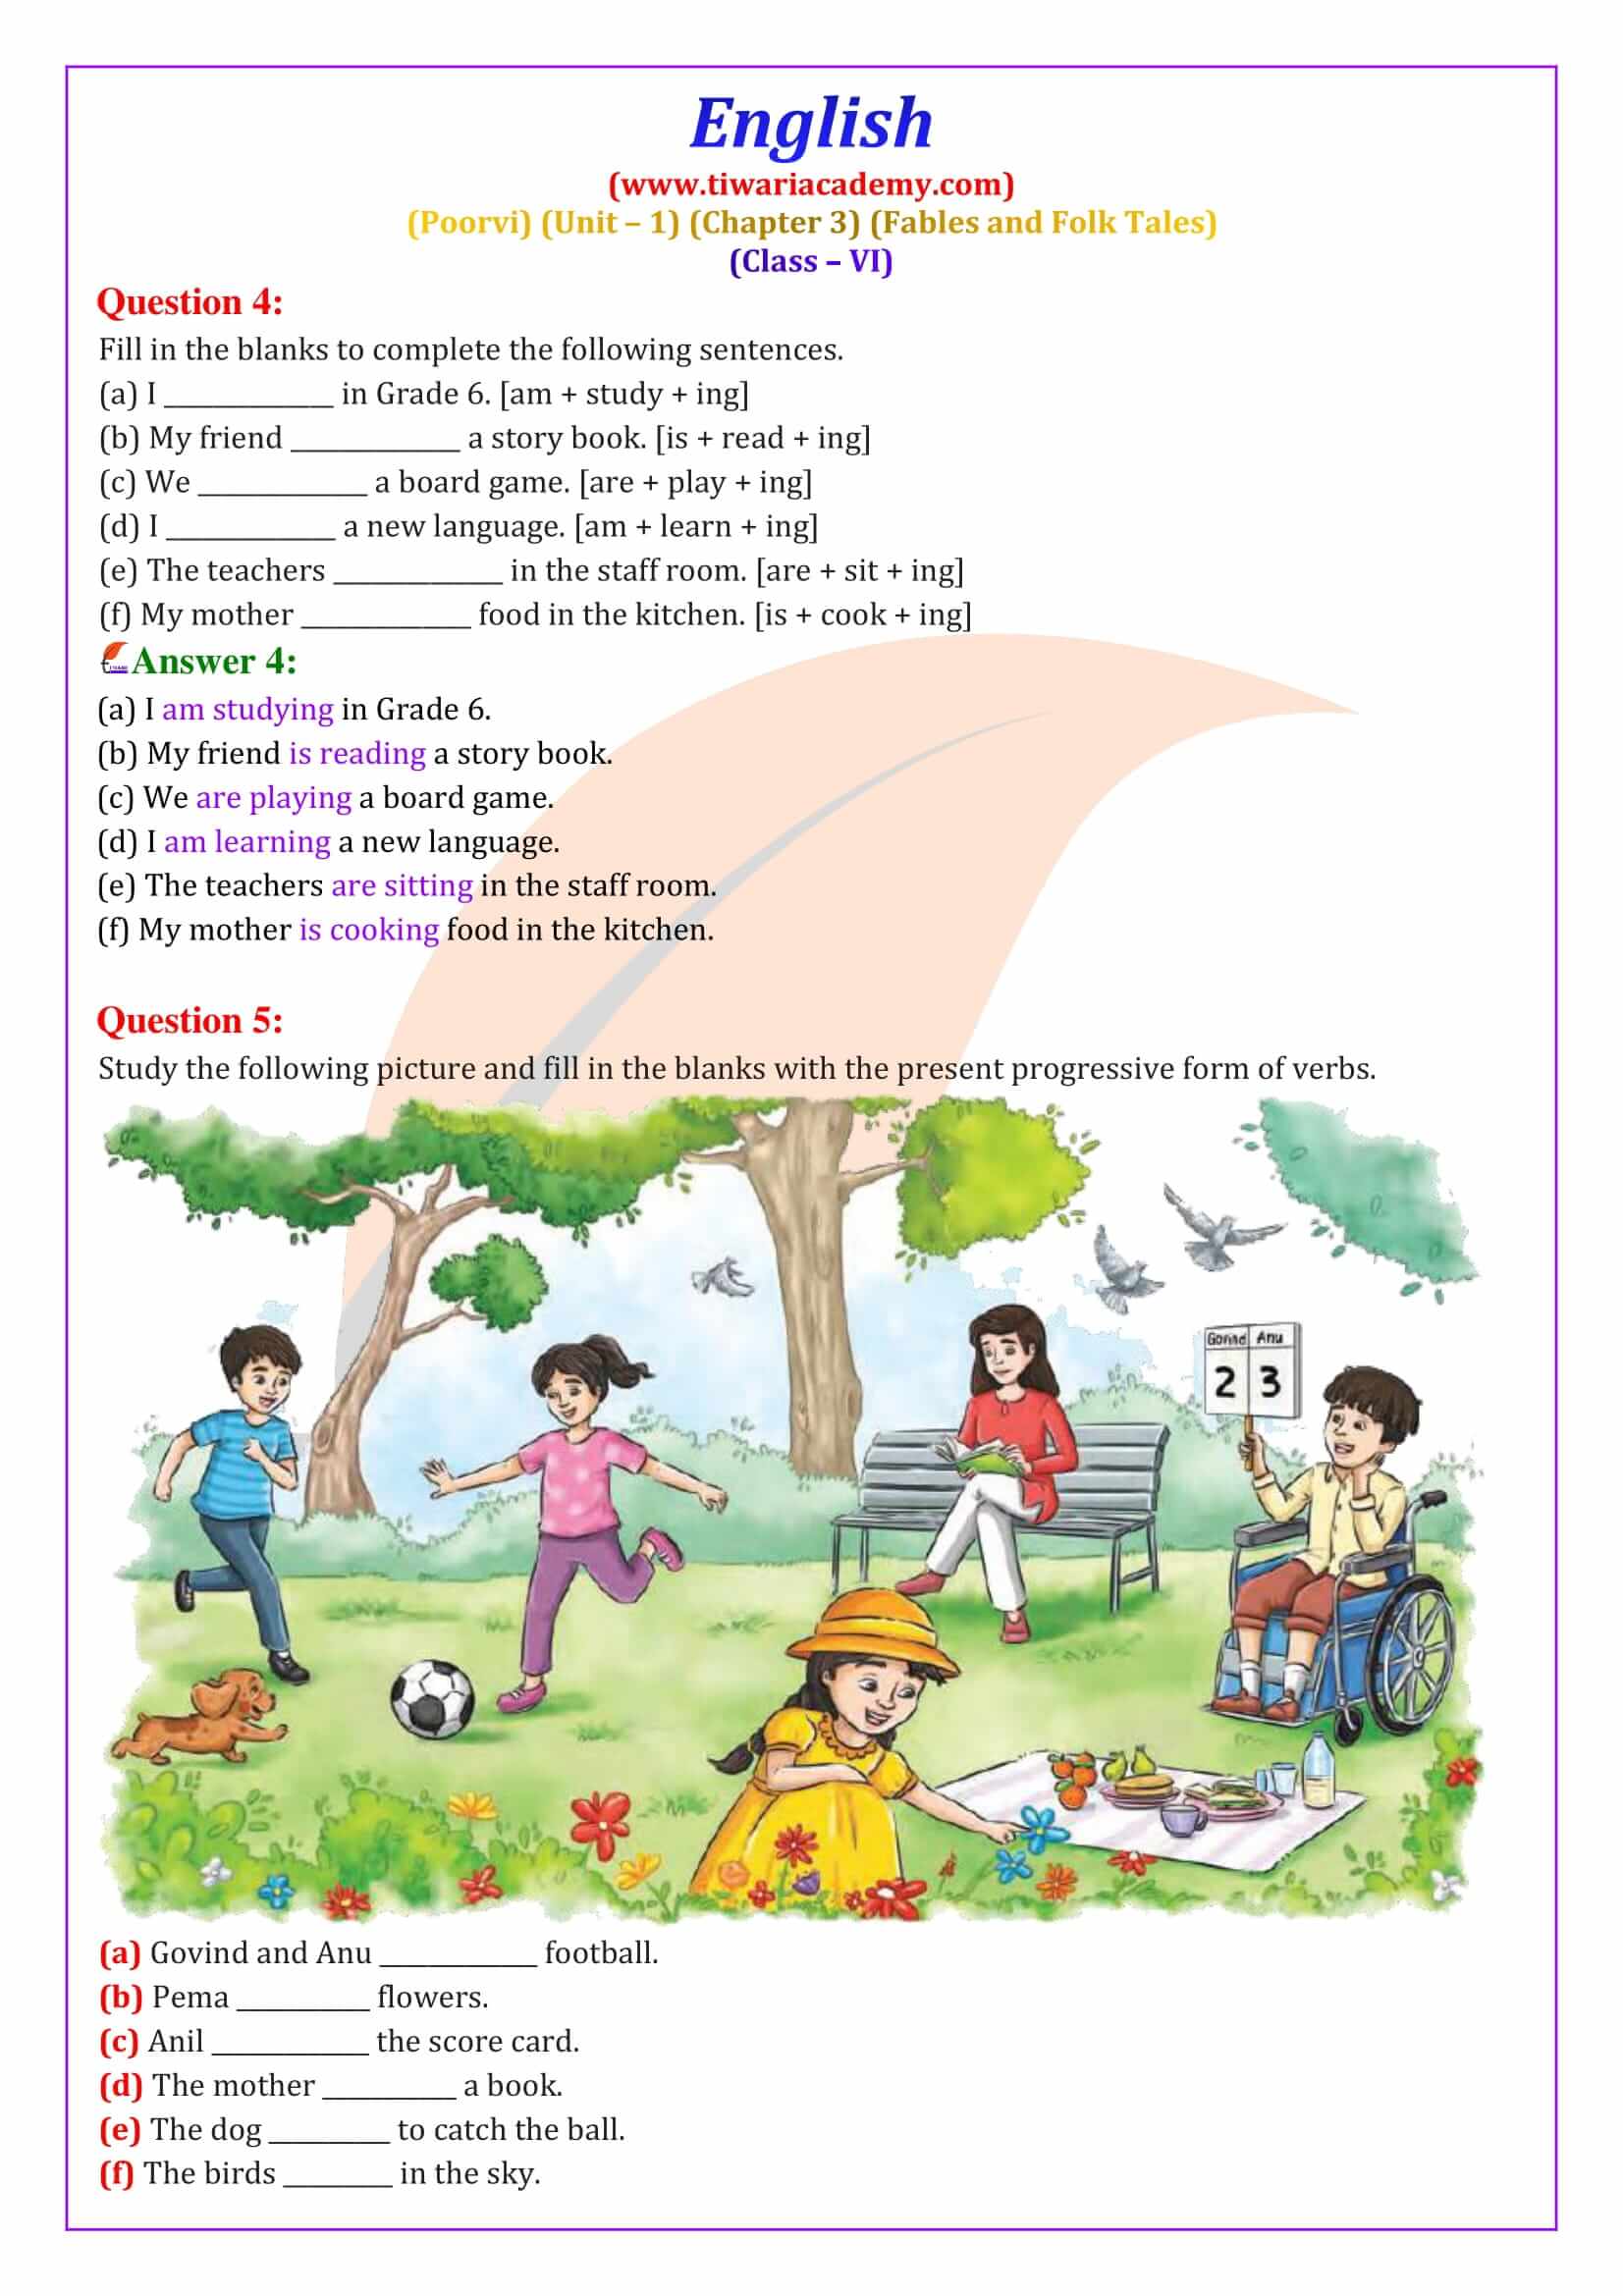 Class 6 English Poorvi Unit 1 Fables and Folk Tales Chapter 3 Question Answers